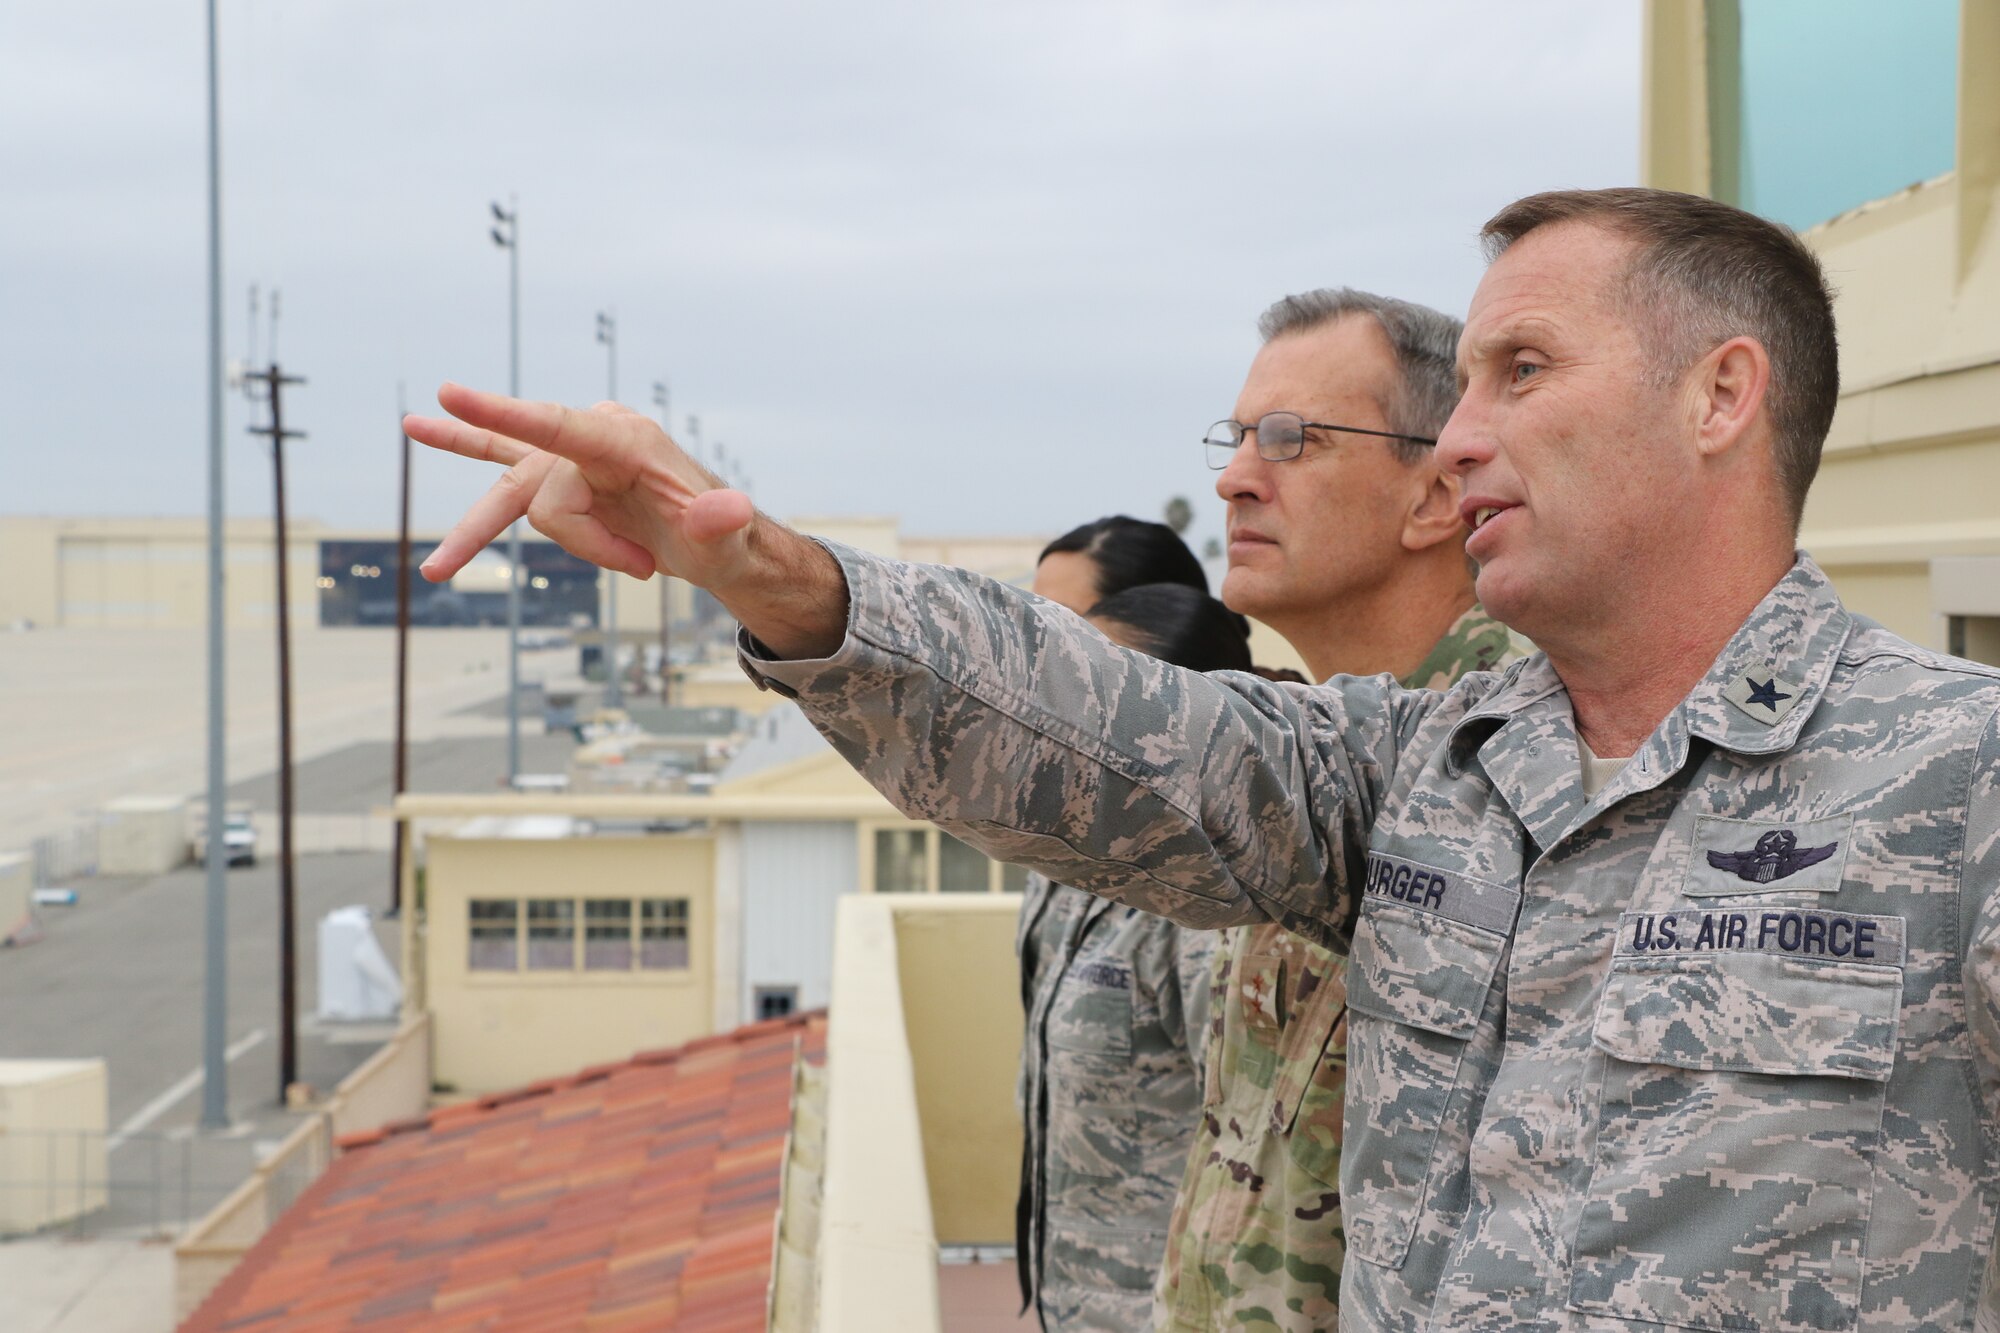 U.S. Air Force Brig. Gen. Matthew Burger, commander, 452nd Air Mobility Wing, March Air Reserve Base, points toward multiple C-17 Globemaster III aircraft on the flight line here as U.S. Air Force Maj. Gen. Randall Ogden, commander, Fourth Air Force, March ARB observes Feb. 9, 2019